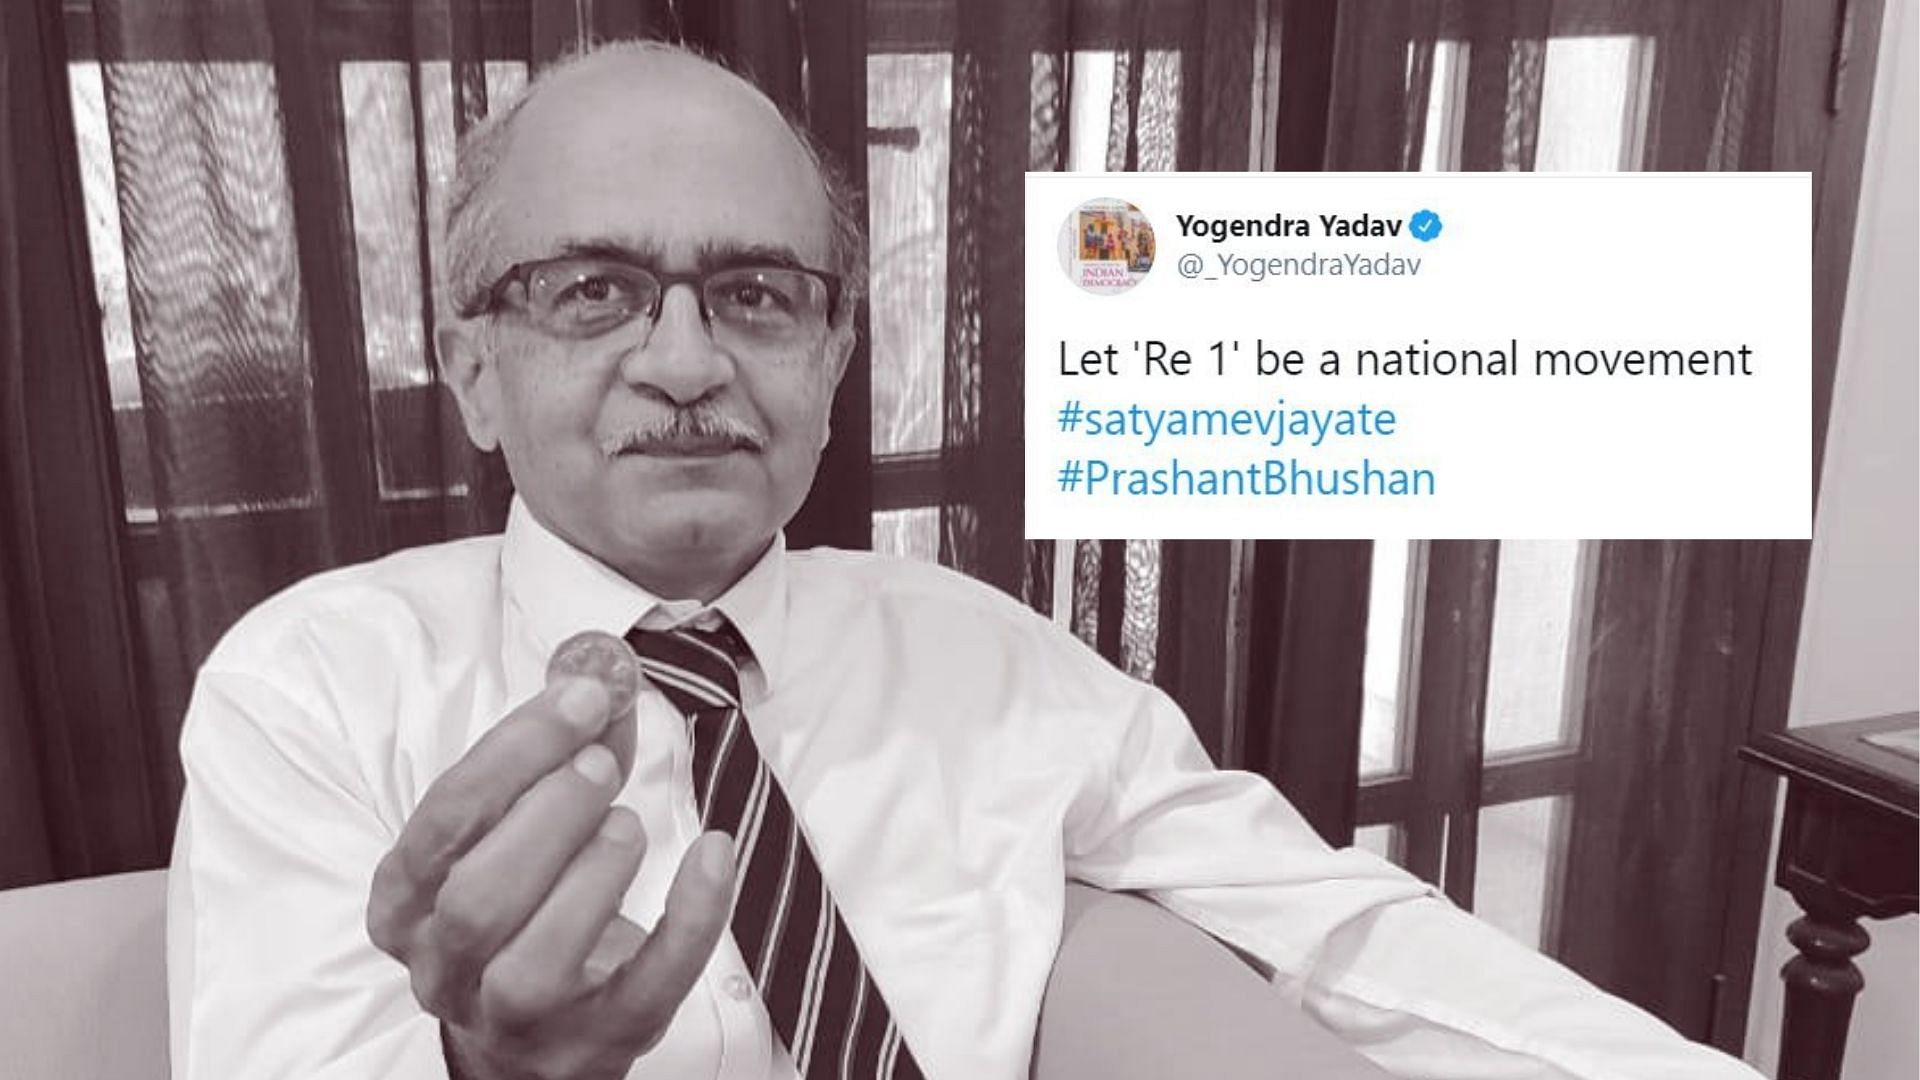 Prashant Bhushan ‘gratefully accepted’ the Re 1 fine imposed by the Supreme Court.